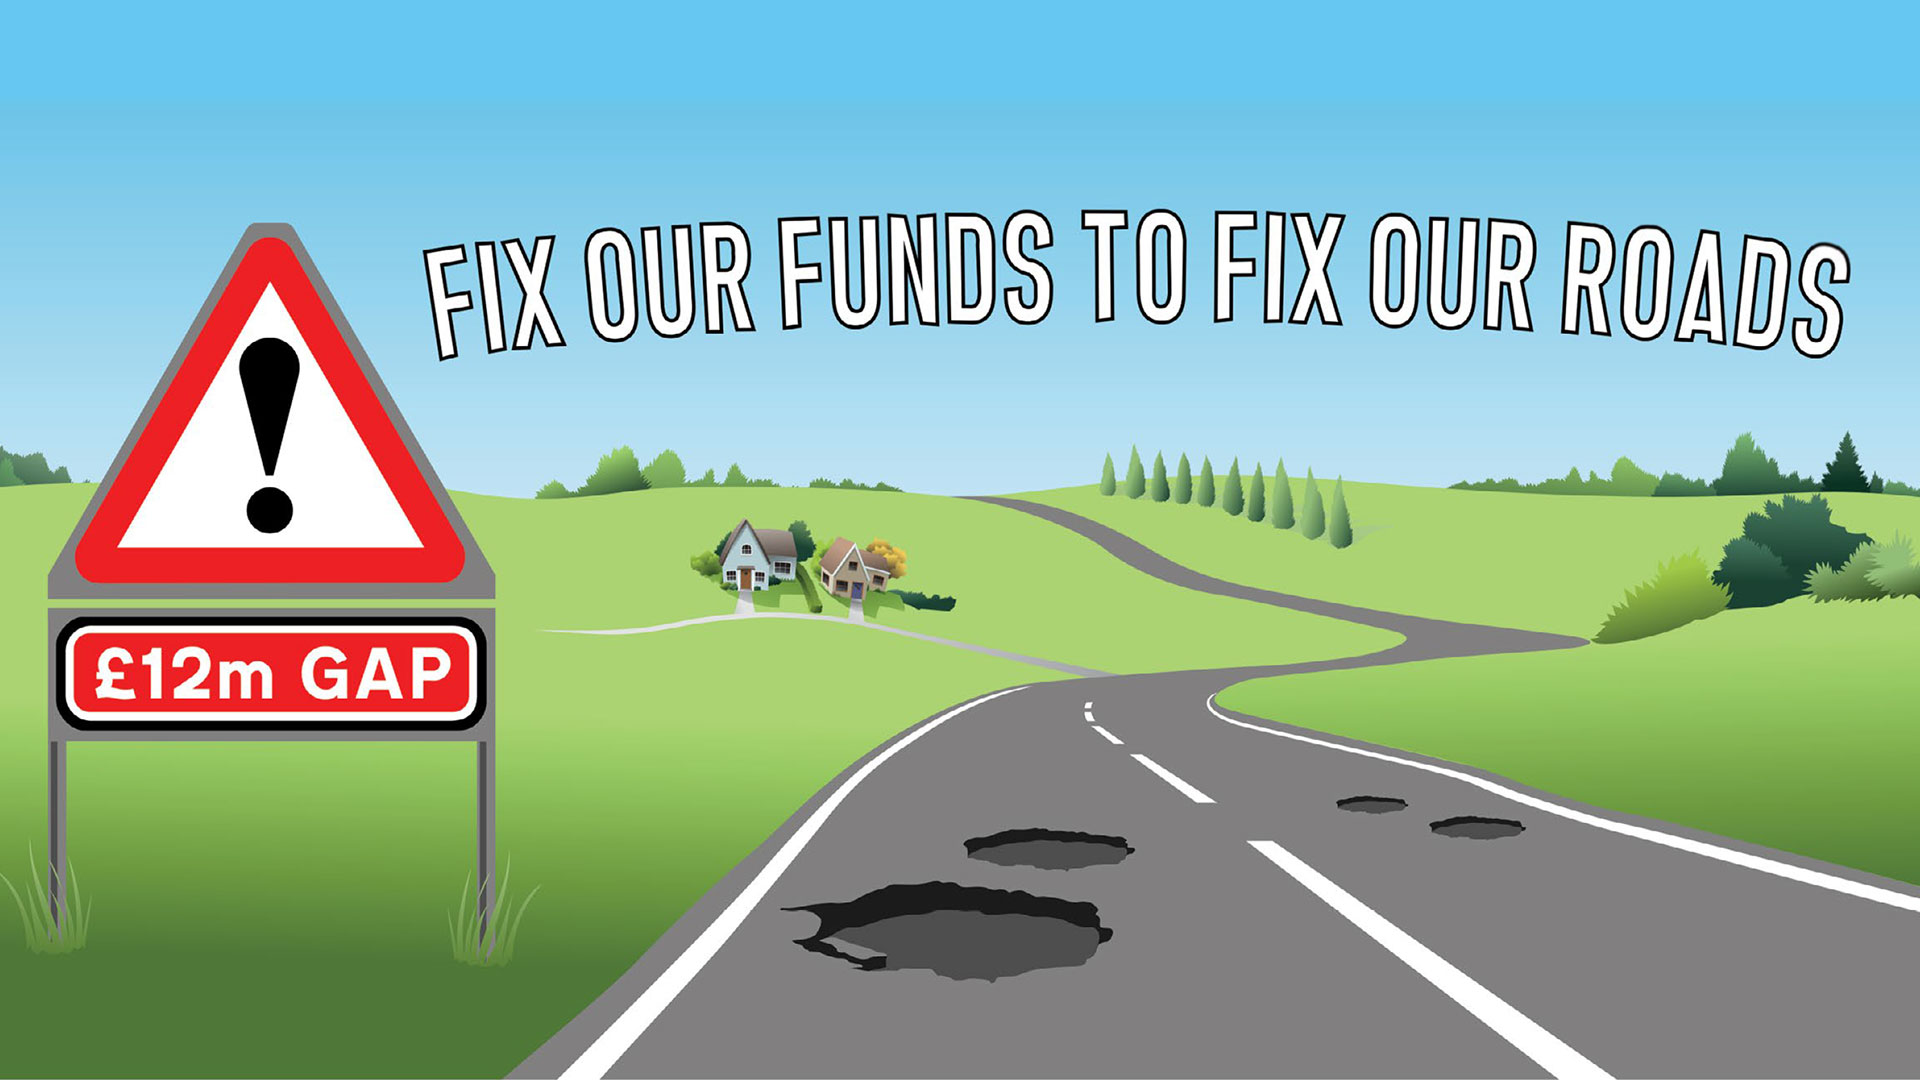 Fix our funds to fix our roads